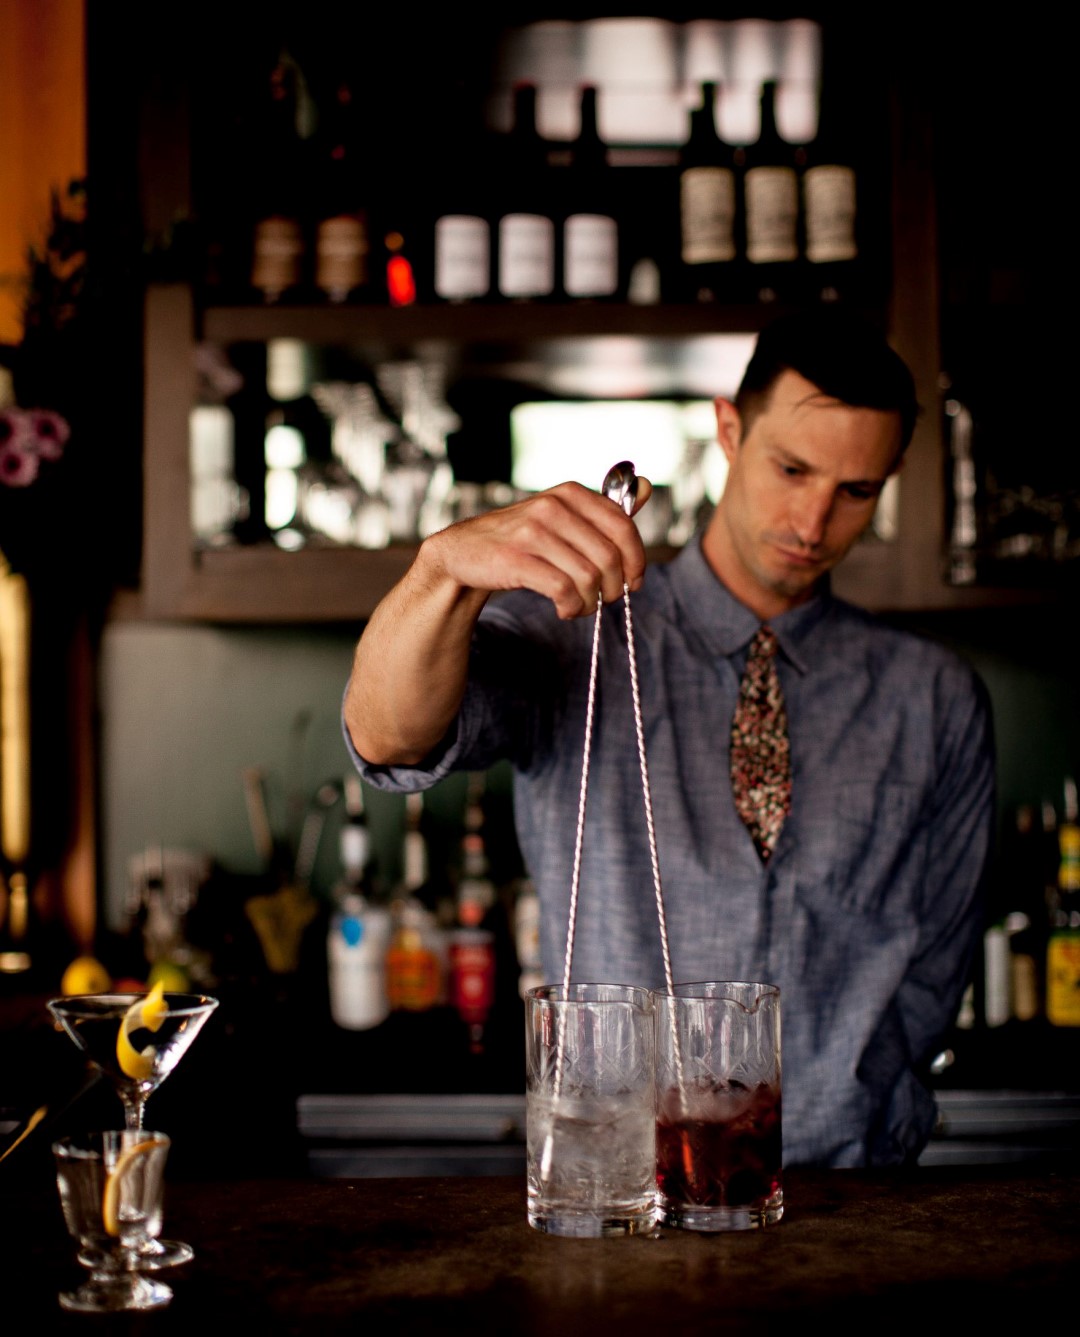 Mixing magic: Great cocktails at FIG (FOOD IS GOOD). Bartenders at Charleston’s many excellent bars and restaurants are finding new ways to make great drinks, often using local ingredients in novel ways. Photo courtesy FIG.